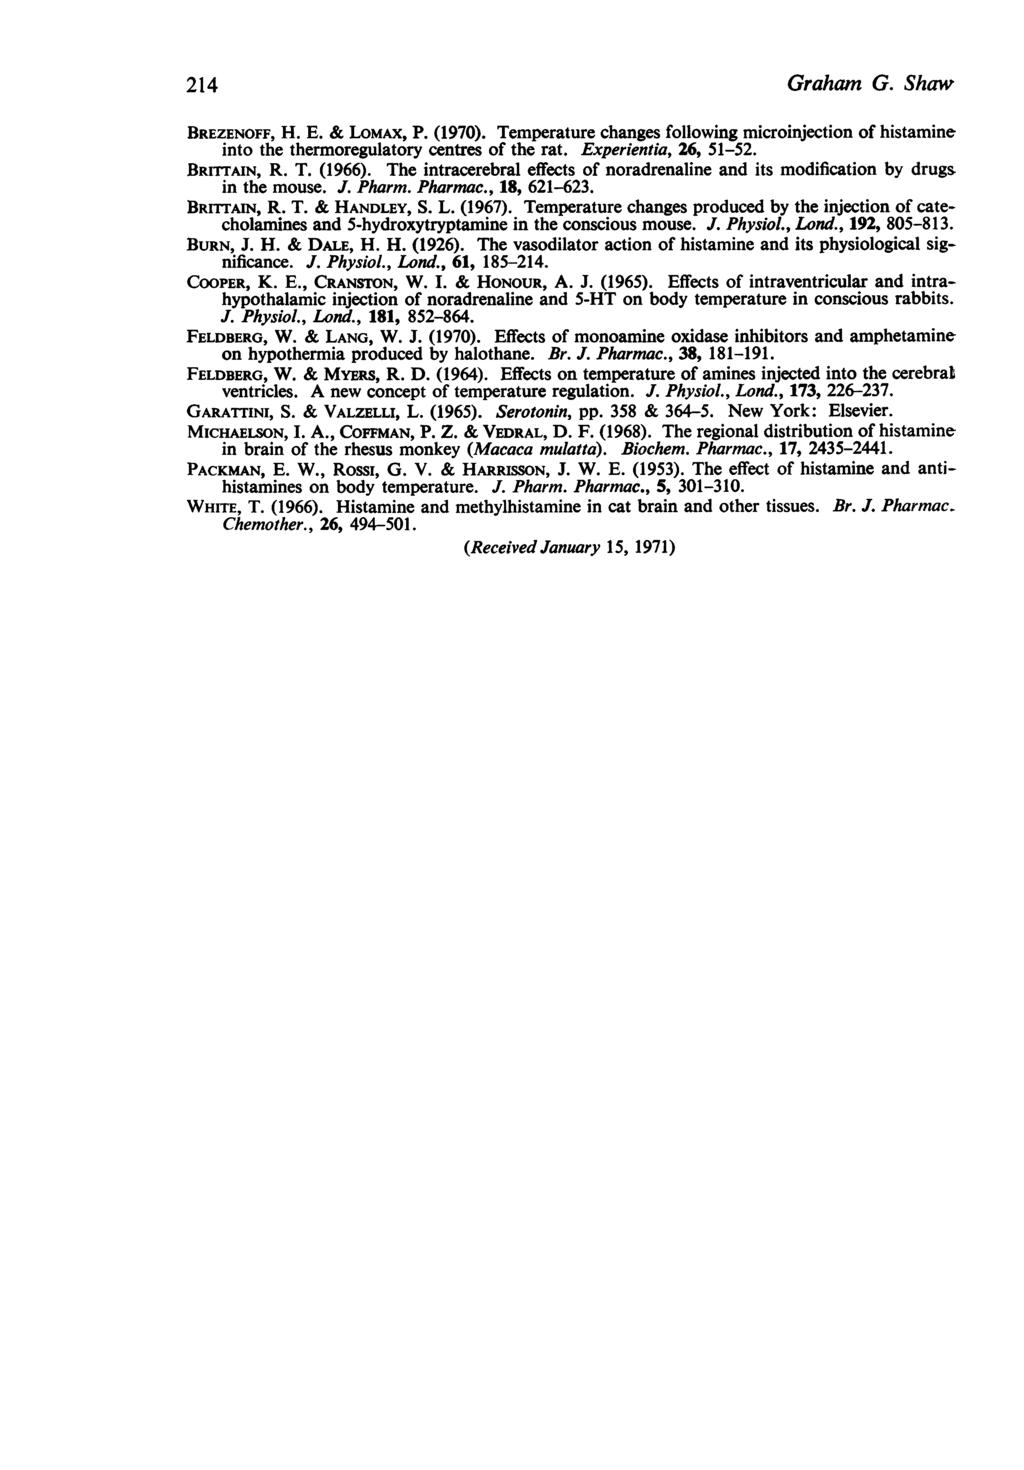 214 Graham G. Shaw BREZENOFF, H. E. & LOMAX, P. (1970). Temperature changes following microinjection of histamine into the thermoregulatory centres of the rat. Experientia, 26, 51-52. BRITTAIN, R. T. (1966).